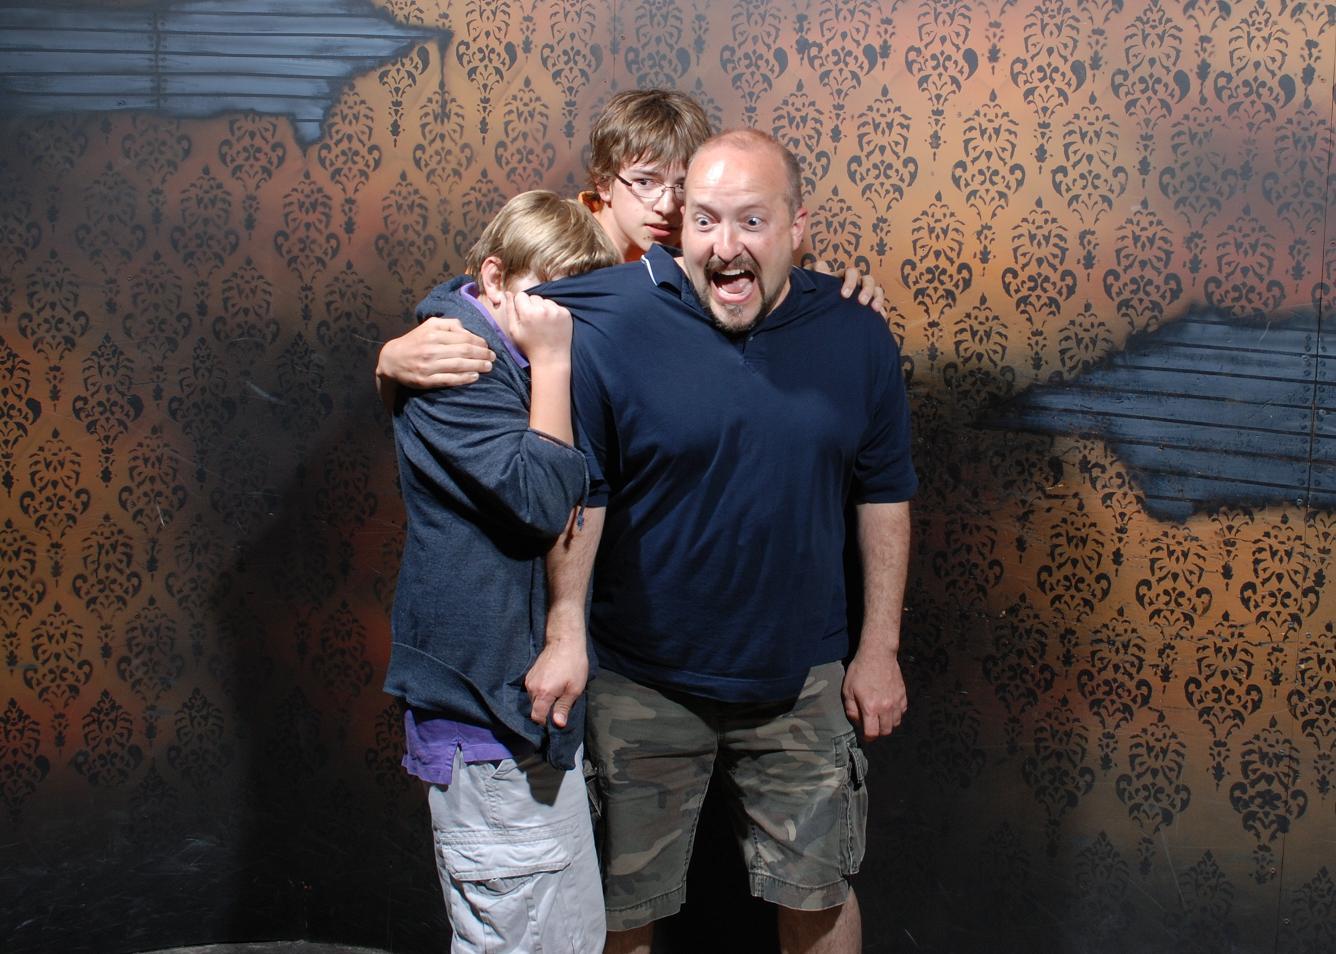 Top 40 FEAR Pics for September, 2012 | Nightmares Fear Factory